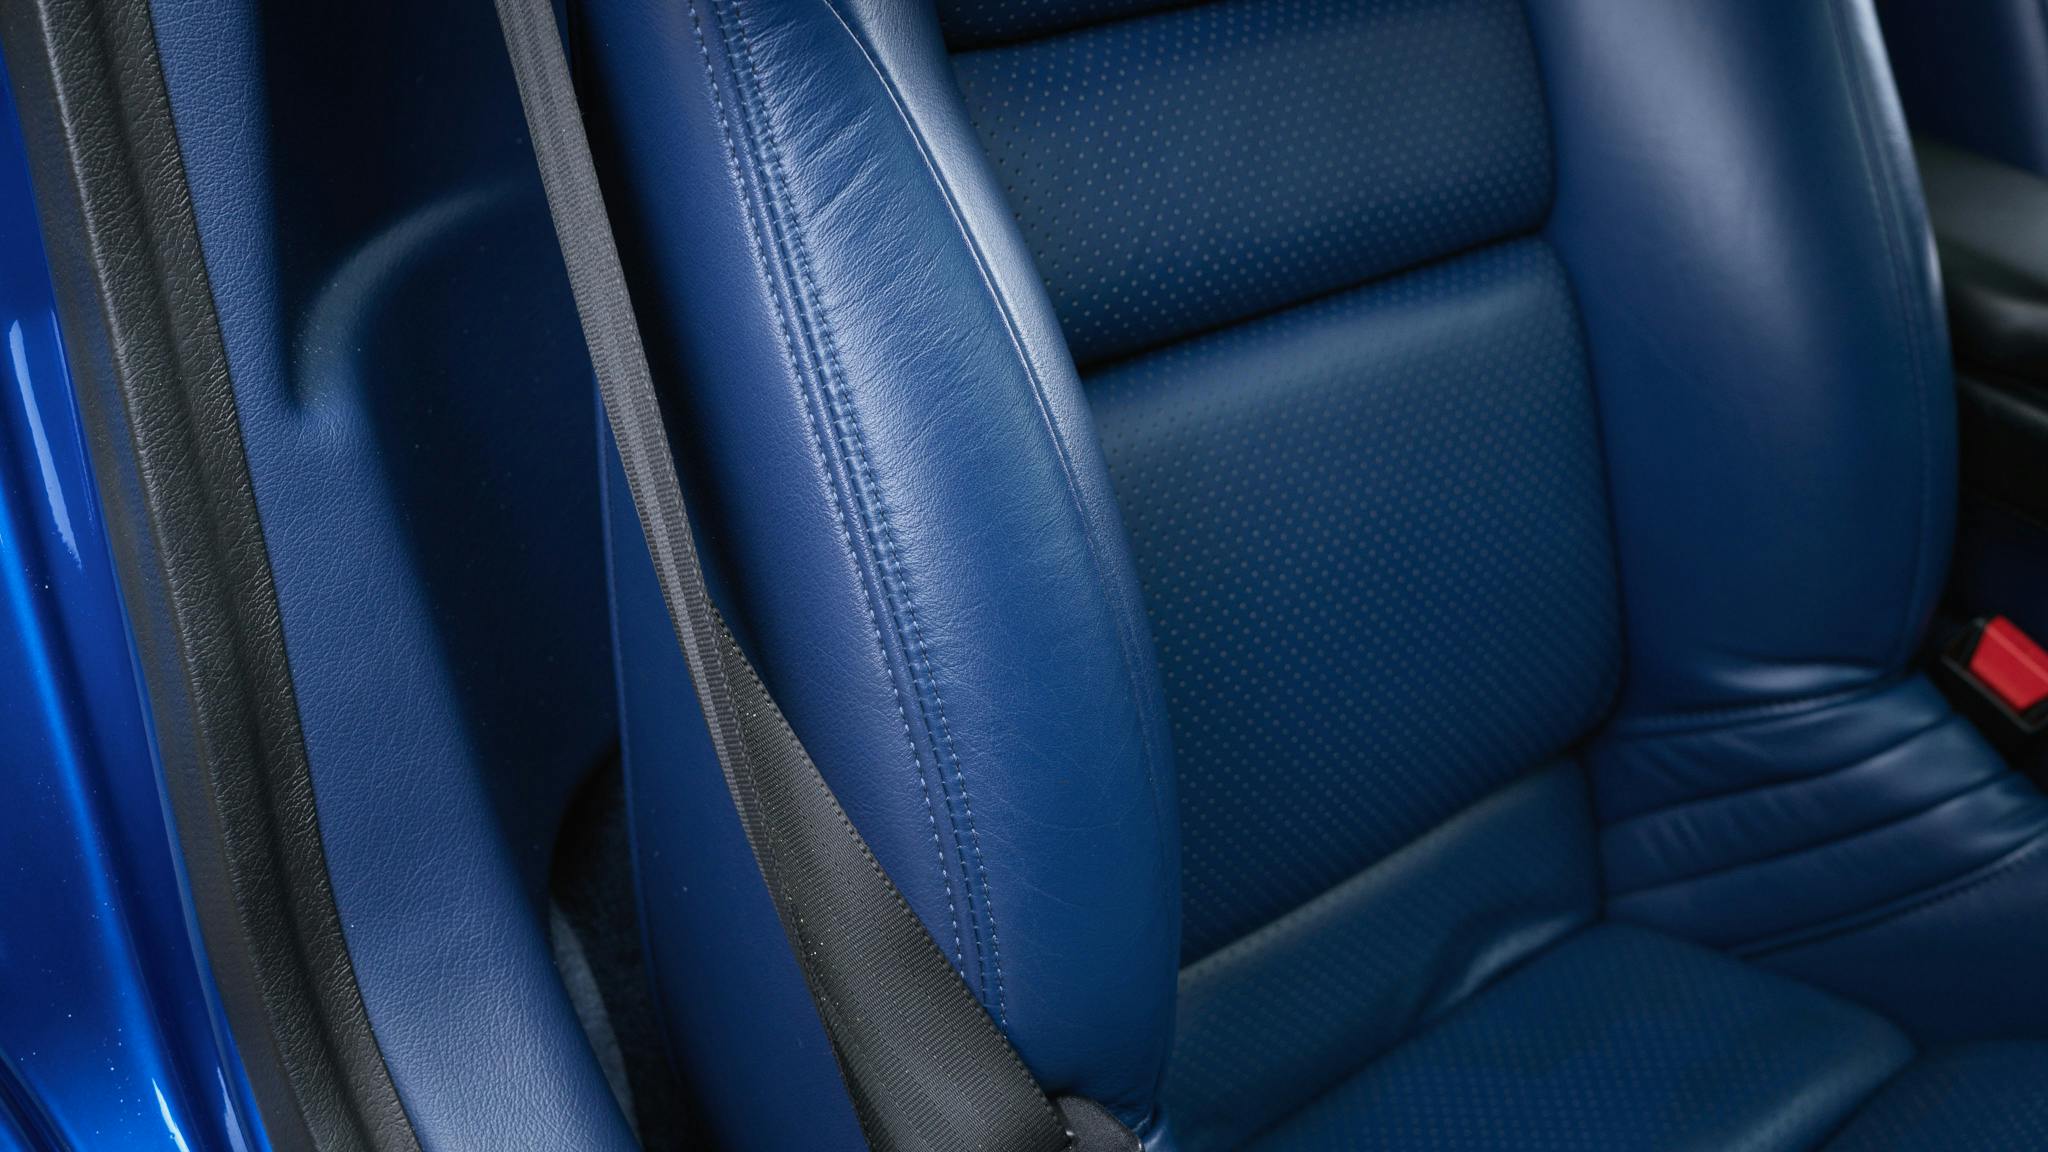 2003 Acura NSX-T interior leather seat detail